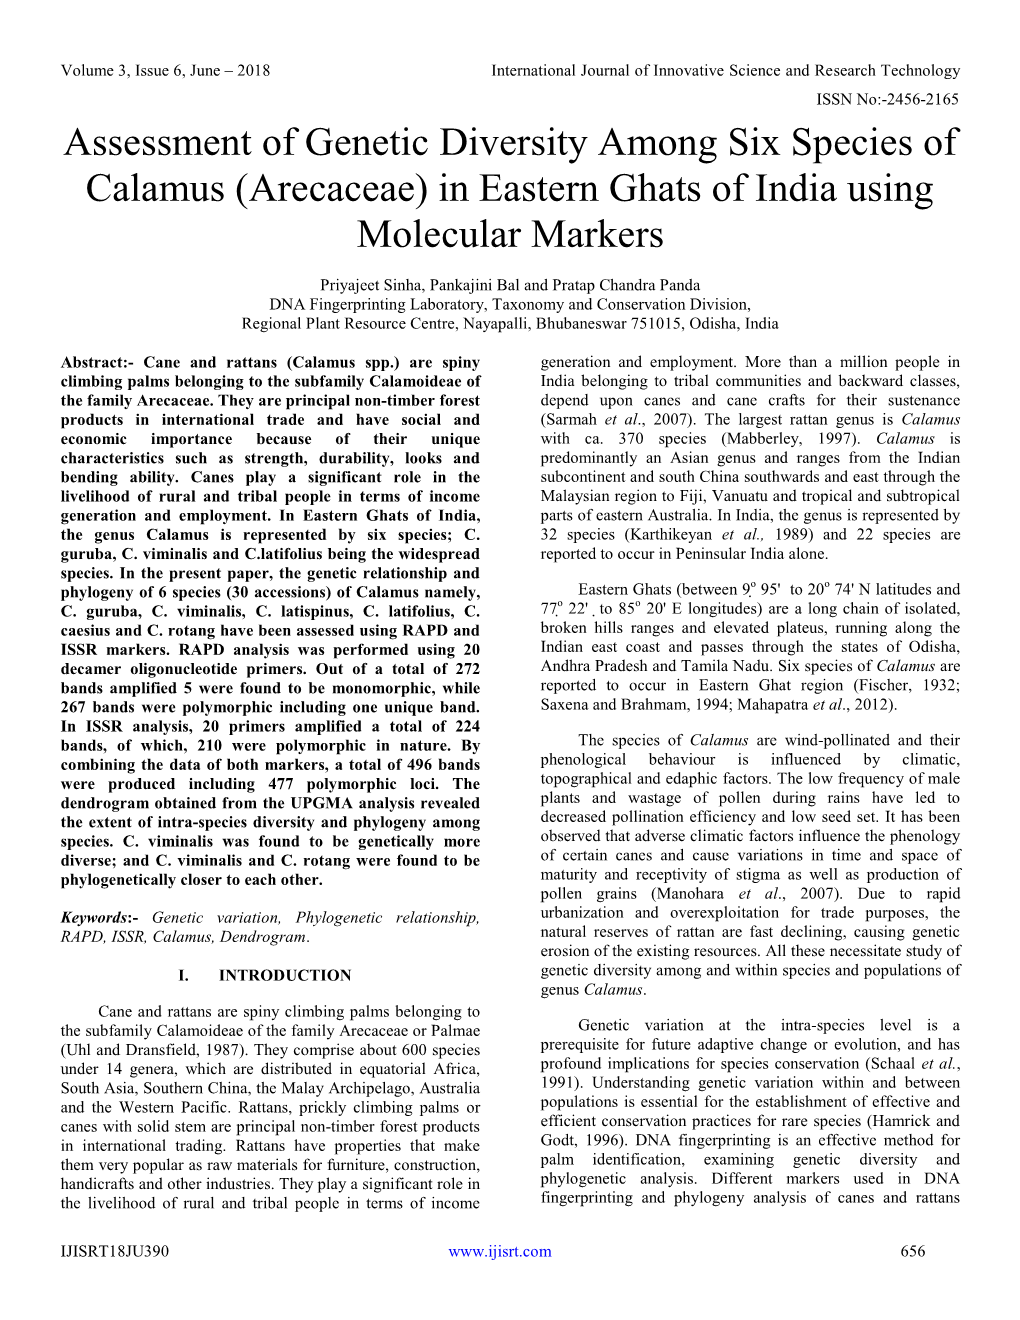 Assessment of Genetic Diversity Among Six Species of Calamus (Arecaceae) in Eastern Ghats of India Using Molecular Markers